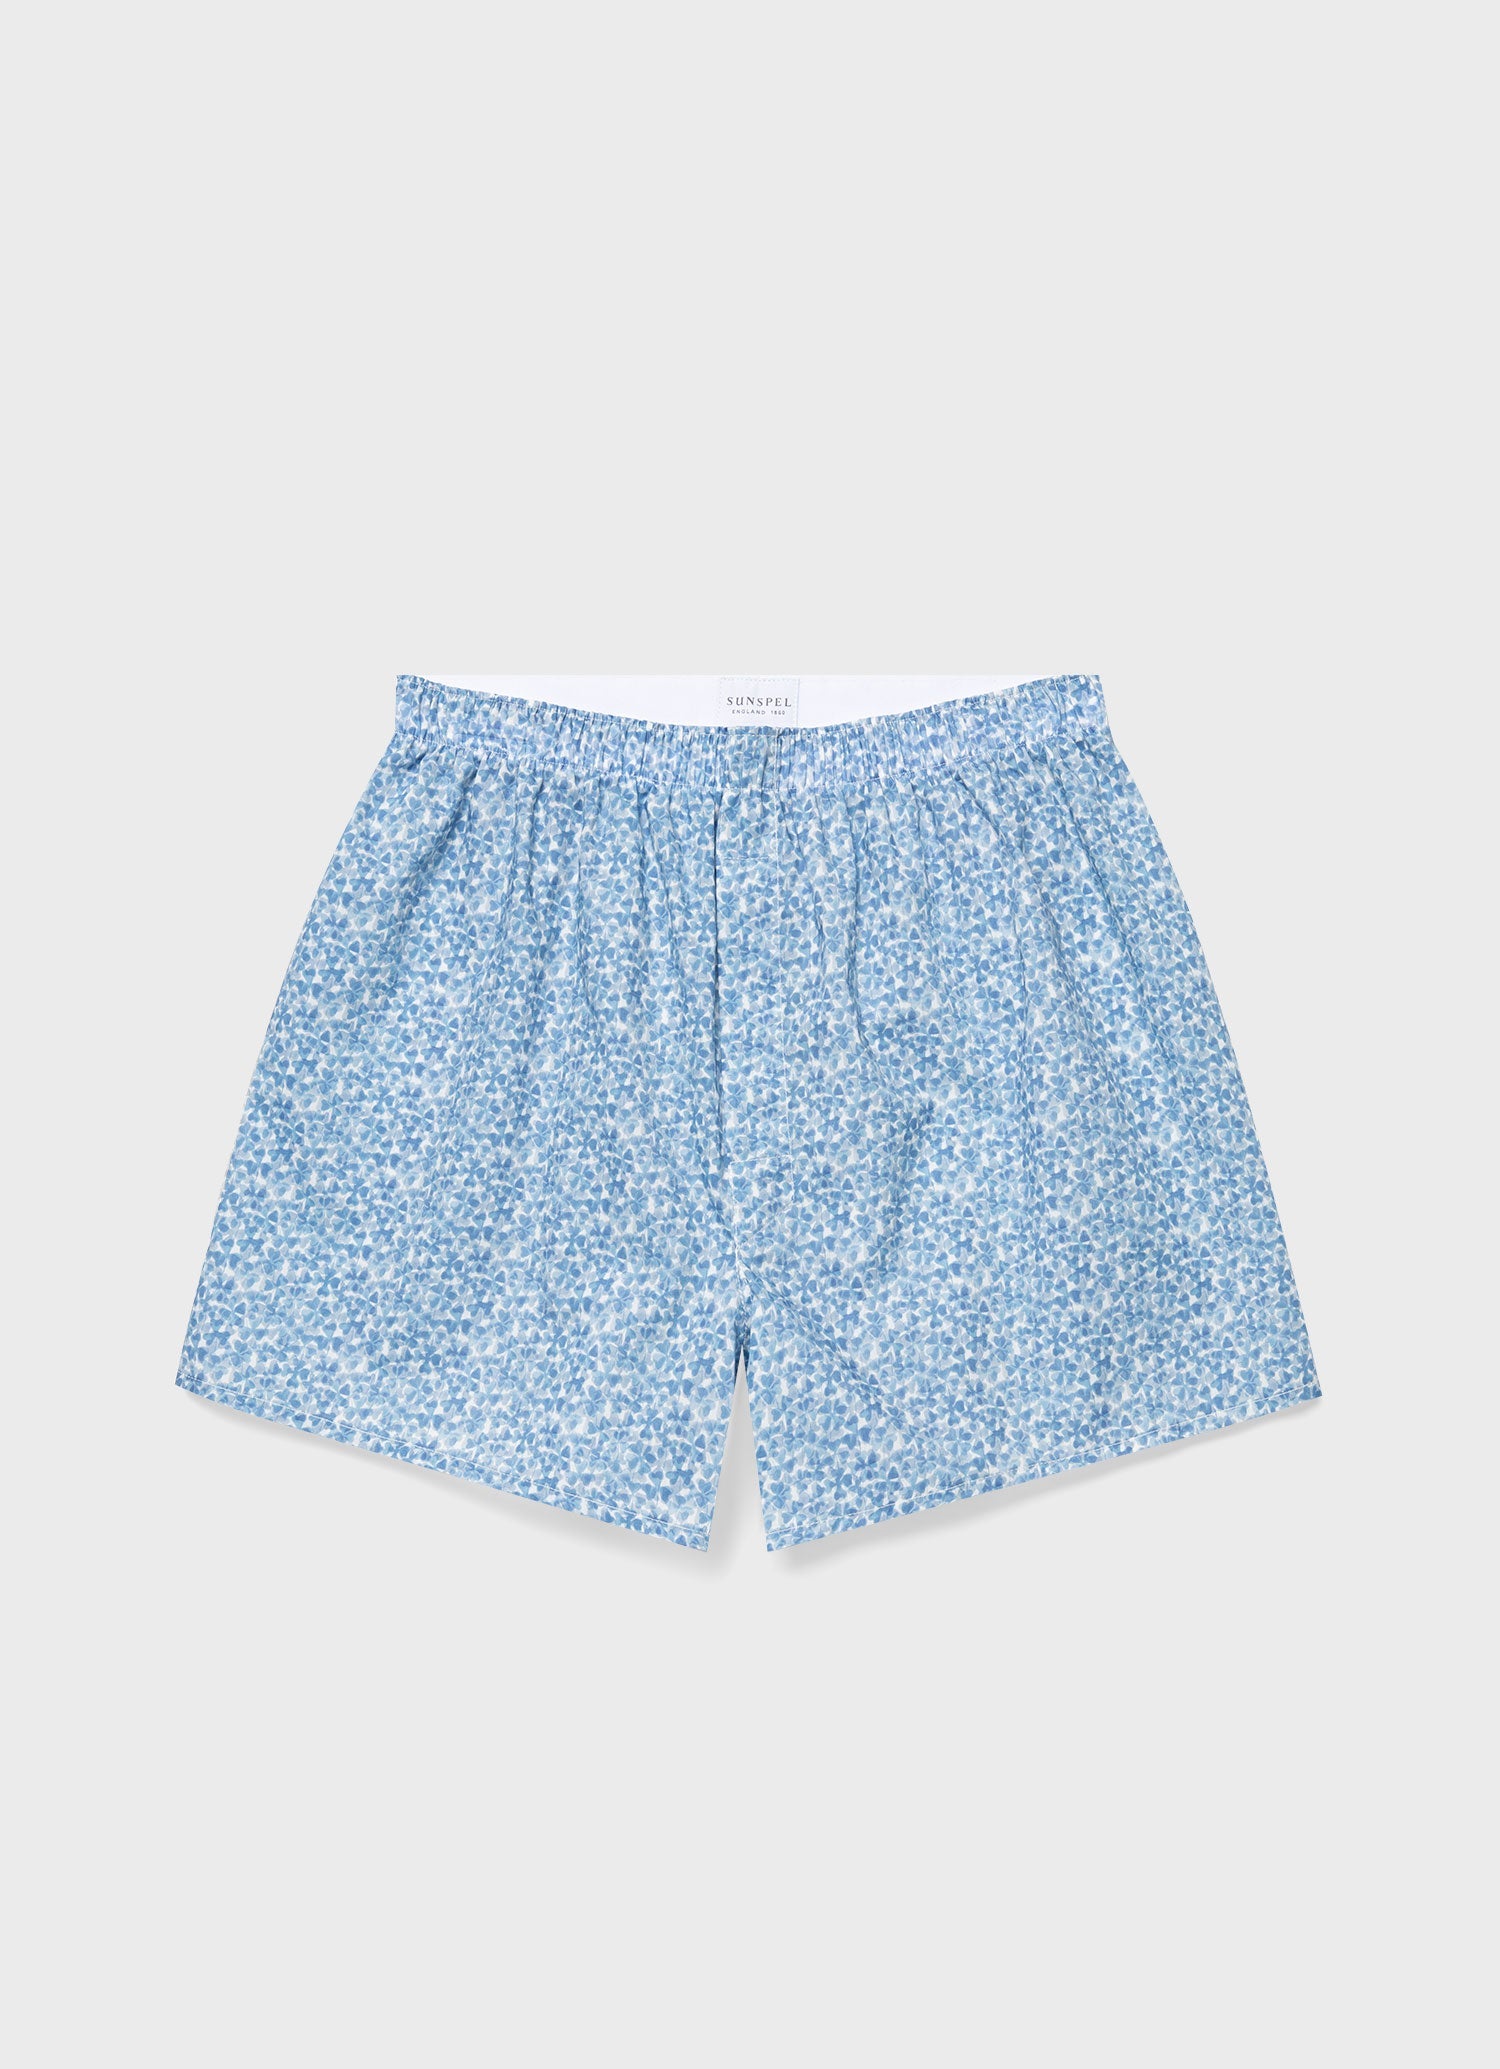 Men's Classic Boxer Shorts in Light Blue Micro Gingham